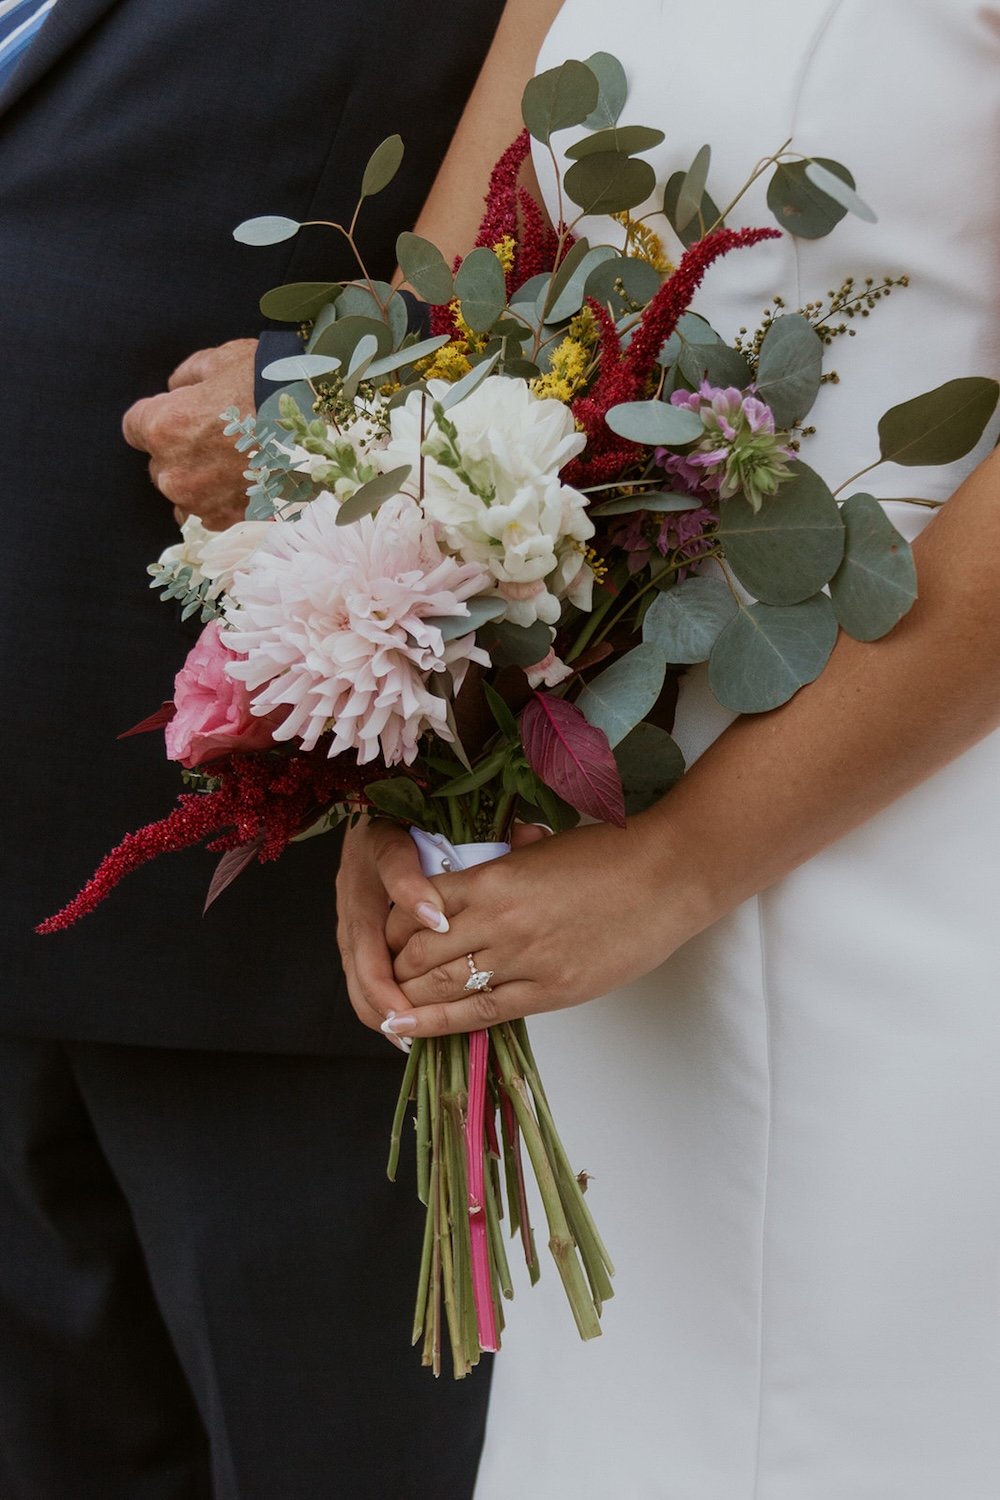 The bouquet decorated with bright pink, fuchsia and white florals.  